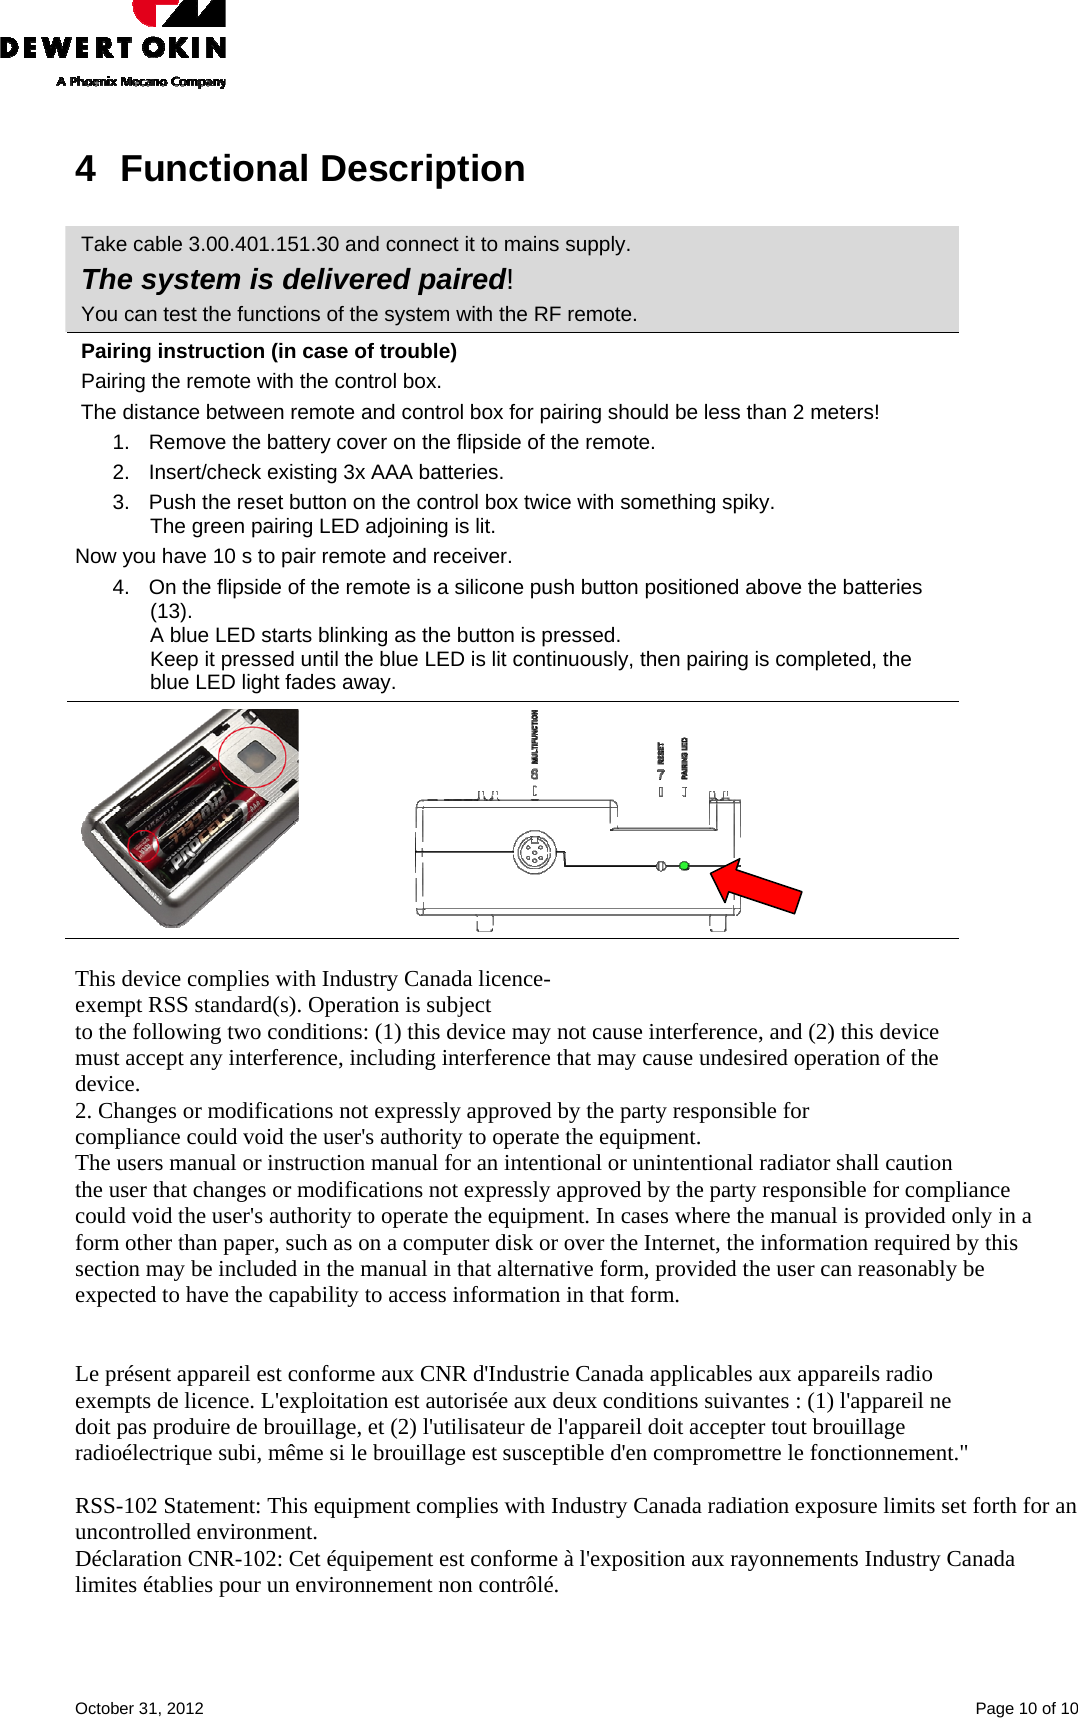    October 31, 2012    Page 10 of 10 4 Functional Description  Take cable 3.00.401.151.30 and connect it to mains supply.  The system is delivered paired! You can test the functions of the system with the RF remote. Pairing instruction (in case of trouble) Pairing the remote with the control box.  The distance between remote and control box for pairing should be less than 2 meters! 1.  Remove the battery cover on the flipside of the remote.  2.  Insert/check existing 3x AAA batteries. 3.  Push the reset button on the control box twice with something spiky.  The green pairing LED adjoining is lit. Now you have 10 s to pair remote and receiver. 4.  On the flipside of the remote is a silicone push button positioned above the batteries (13).  A blue LED starts blinking as the button is pressed.  Keep it pressed until the blue LED is lit continuously, then pairing is completed, the blue LED light fades away.                       This device complies with Industry Canada licence- exempt RSS standard(s). Operation is subject to the following two conditions: (1) this device may not cause interference, and (2) this device must accept any interference, including interference that may cause undesired operation of the device. 2. Changes or modifications not expressly approved by the party responsible for  compliance could void the user&apos;s authority to operate the equipment.  The users manual or instruction manual for an intentional or unintentional radiator shall caution the user that changes or modifications not expressly approved by the party responsible for compliance could void the user&apos;s authority to operate the equipment. In cases where the manual is provided only in a form other than paper, such as on a computer disk or over the Internet, the information required by this section may be included in the manual in that alternative form, provided the user can reasonably be expected to have the capability to access information in that form.   Le présent appareil est conforme aux CNR d&apos;Industrie Canada applicables aux appareils radio exempts de licence. L&apos;exploitation est autorisée aux deux conditions suivantes : (1) l&apos;appareil ne doit pas produire de brouillage, et (2) l&apos;utilisateur de l&apos;appareil doit accepter tout brouillage radioélectrique subi, même si le brouillage est susceptible d&apos;en compromettre le fonctionnement.&quot;  RSS-102 Statement: This equipment complies with Industry Canada radiation exposure limits set forth for an uncontrolled environment. Déclaration CNR-102: Cet équipement est conforme à l&apos;exposition aux rayonnements Industry Canada limites établies pour un environnement non contrôlé.  